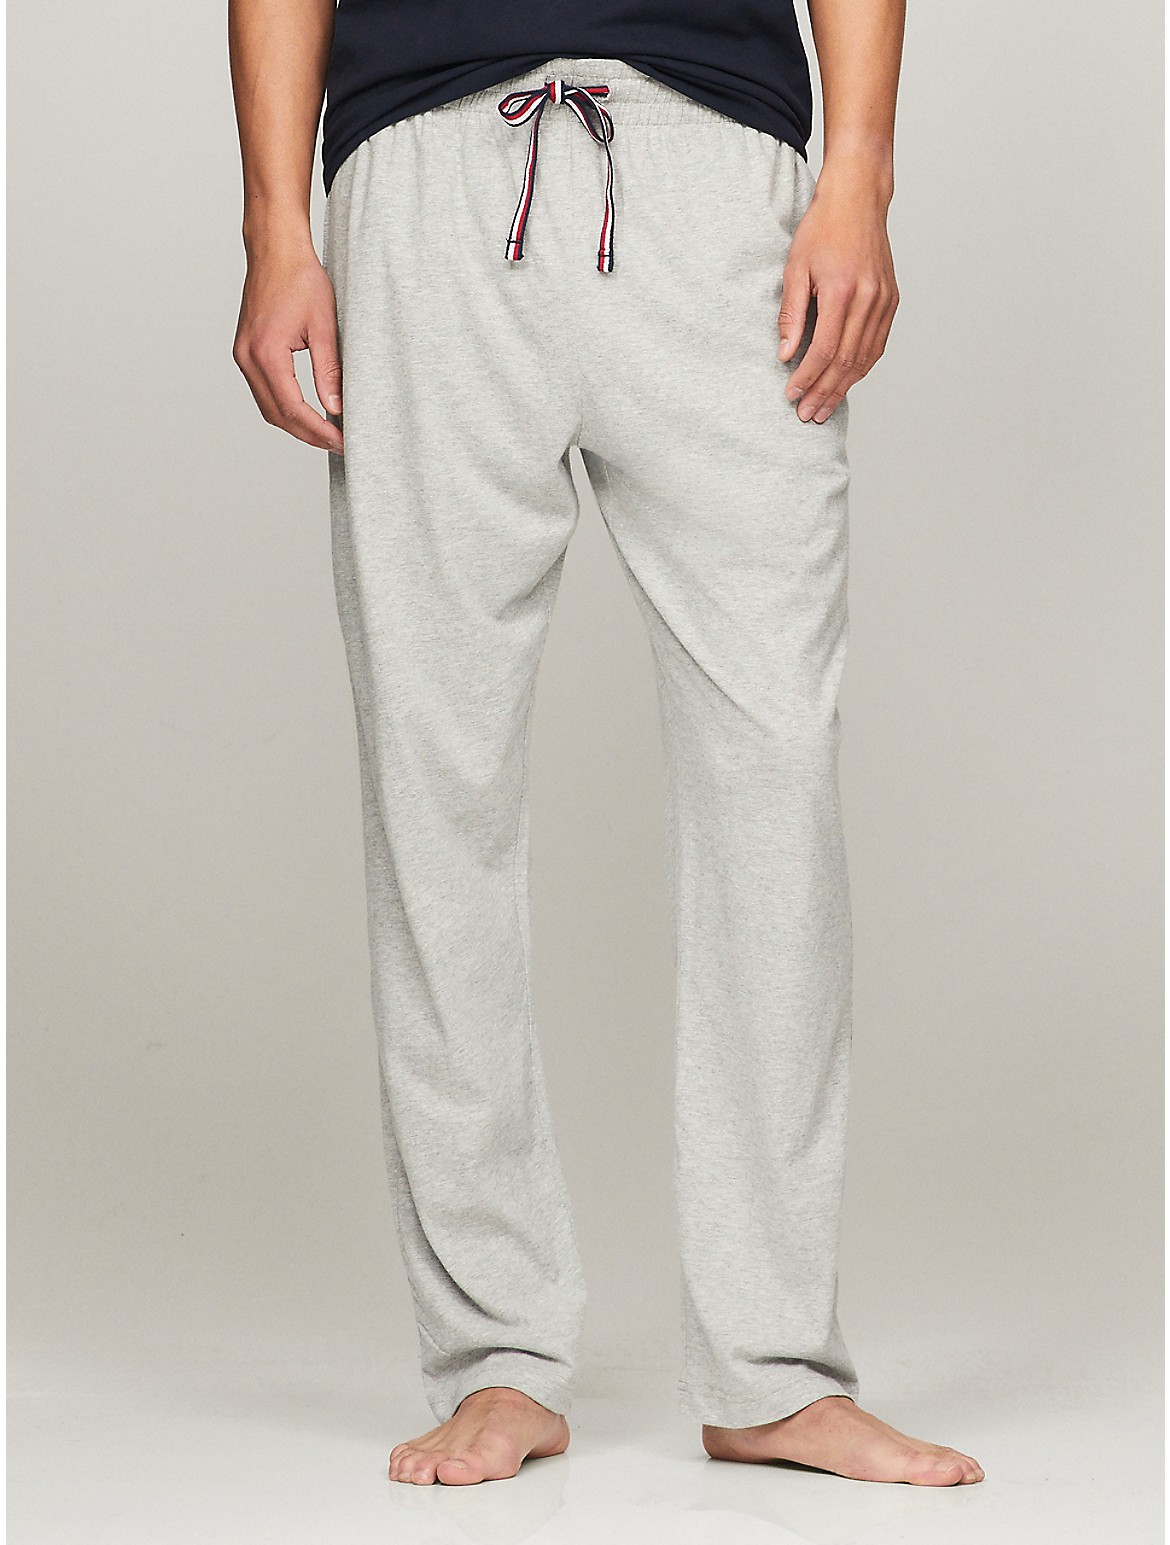 Tommy Hilfiger Men's Sueded Jersey Sleep Pant